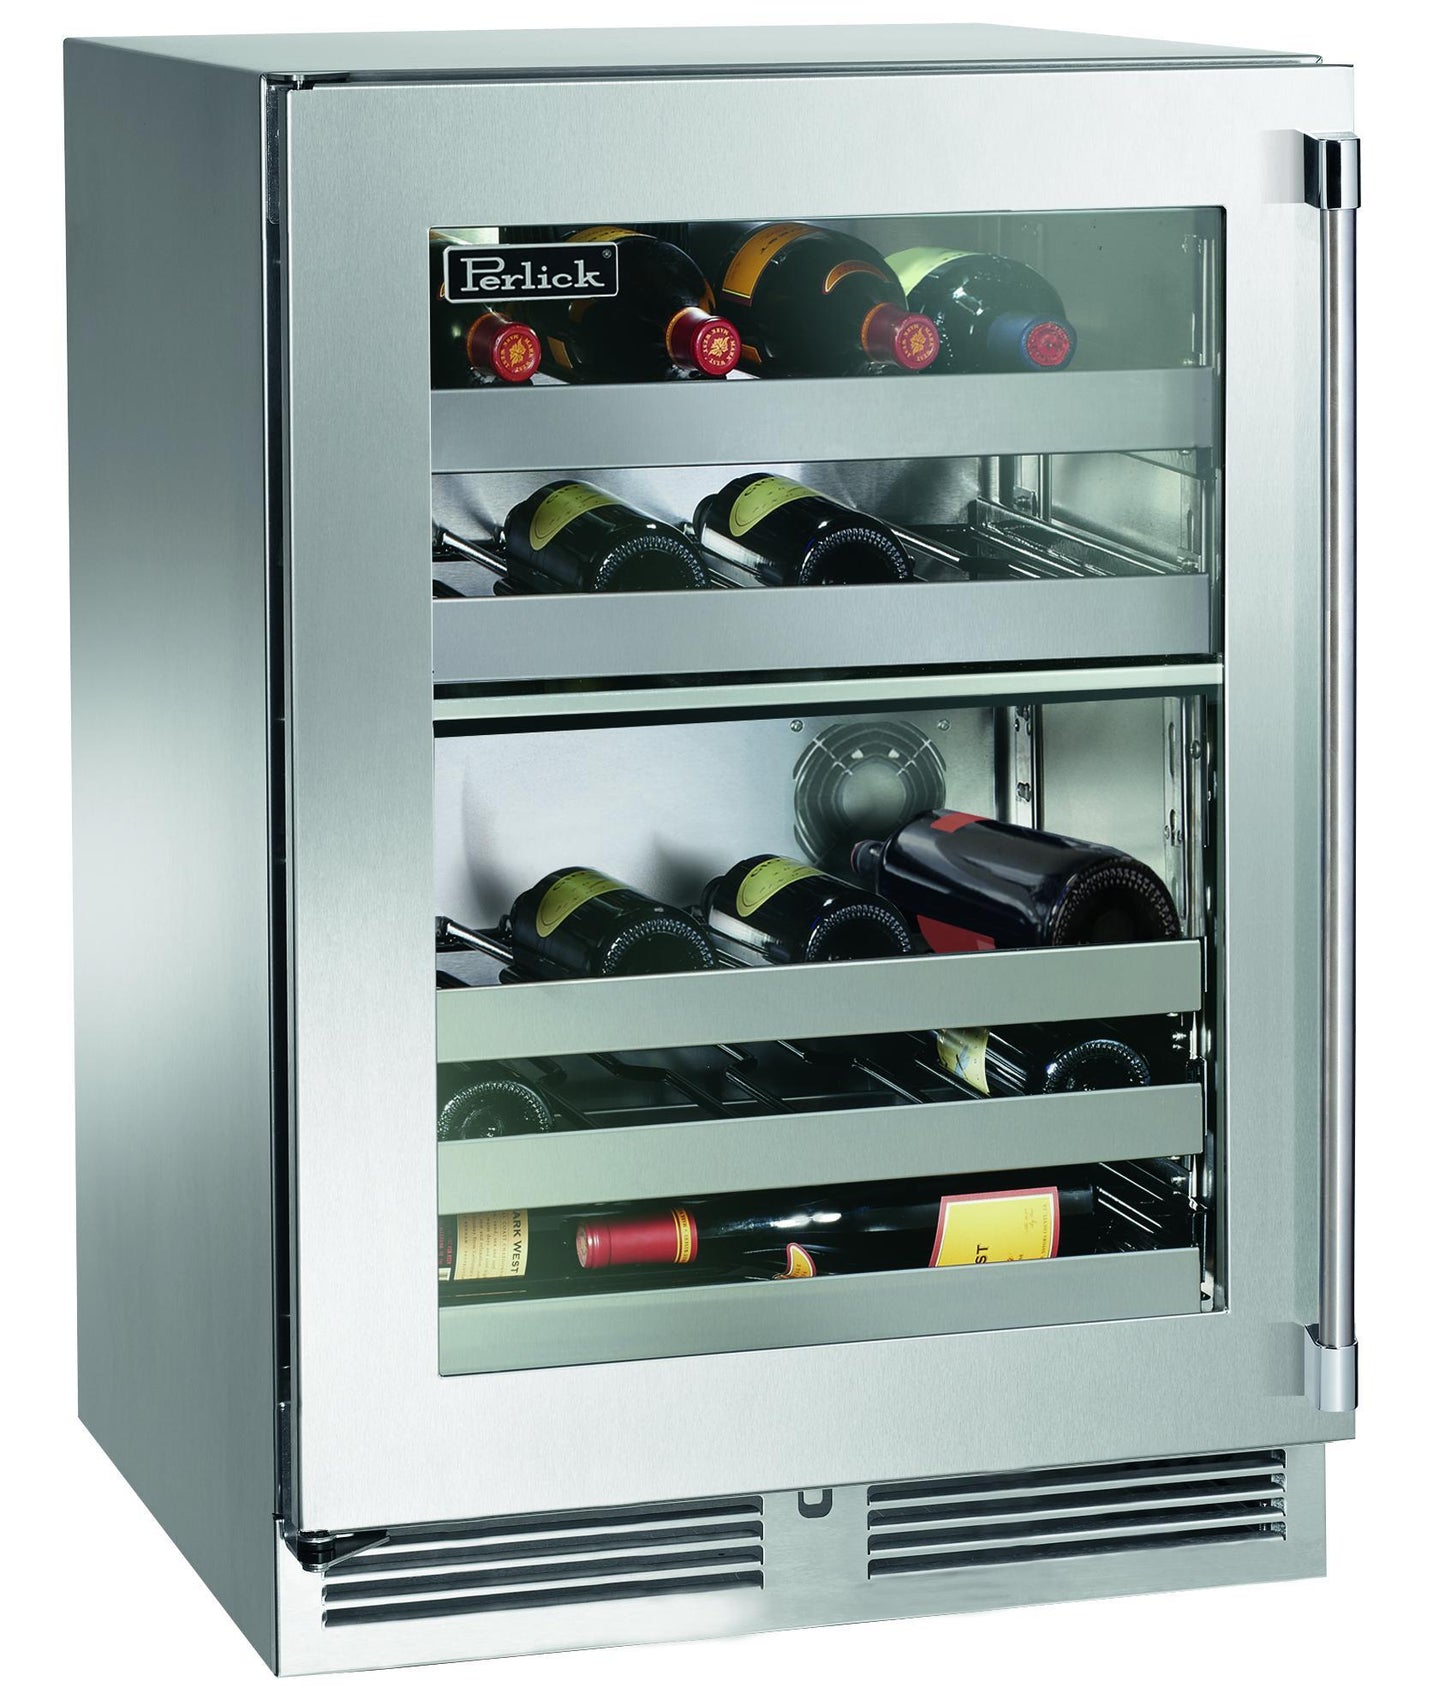 Perlick HP24DO43L 24"Outdoor Dual-Zone Wine Reserve